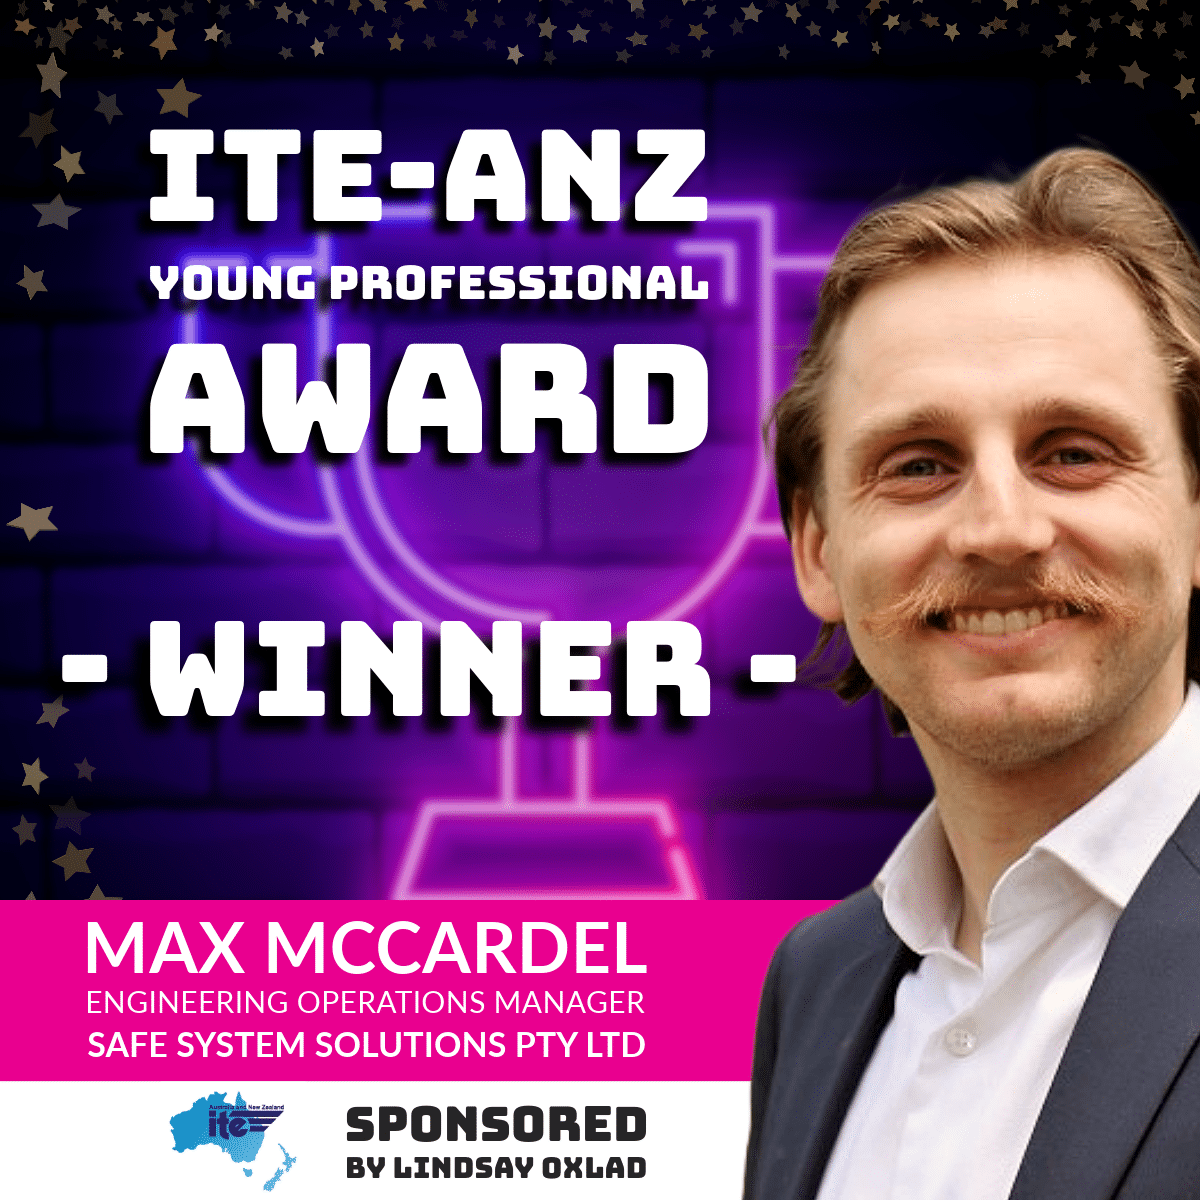 Congratulations to Max McCardel on winning the 2023 ITE-ANZ Young Professional Award